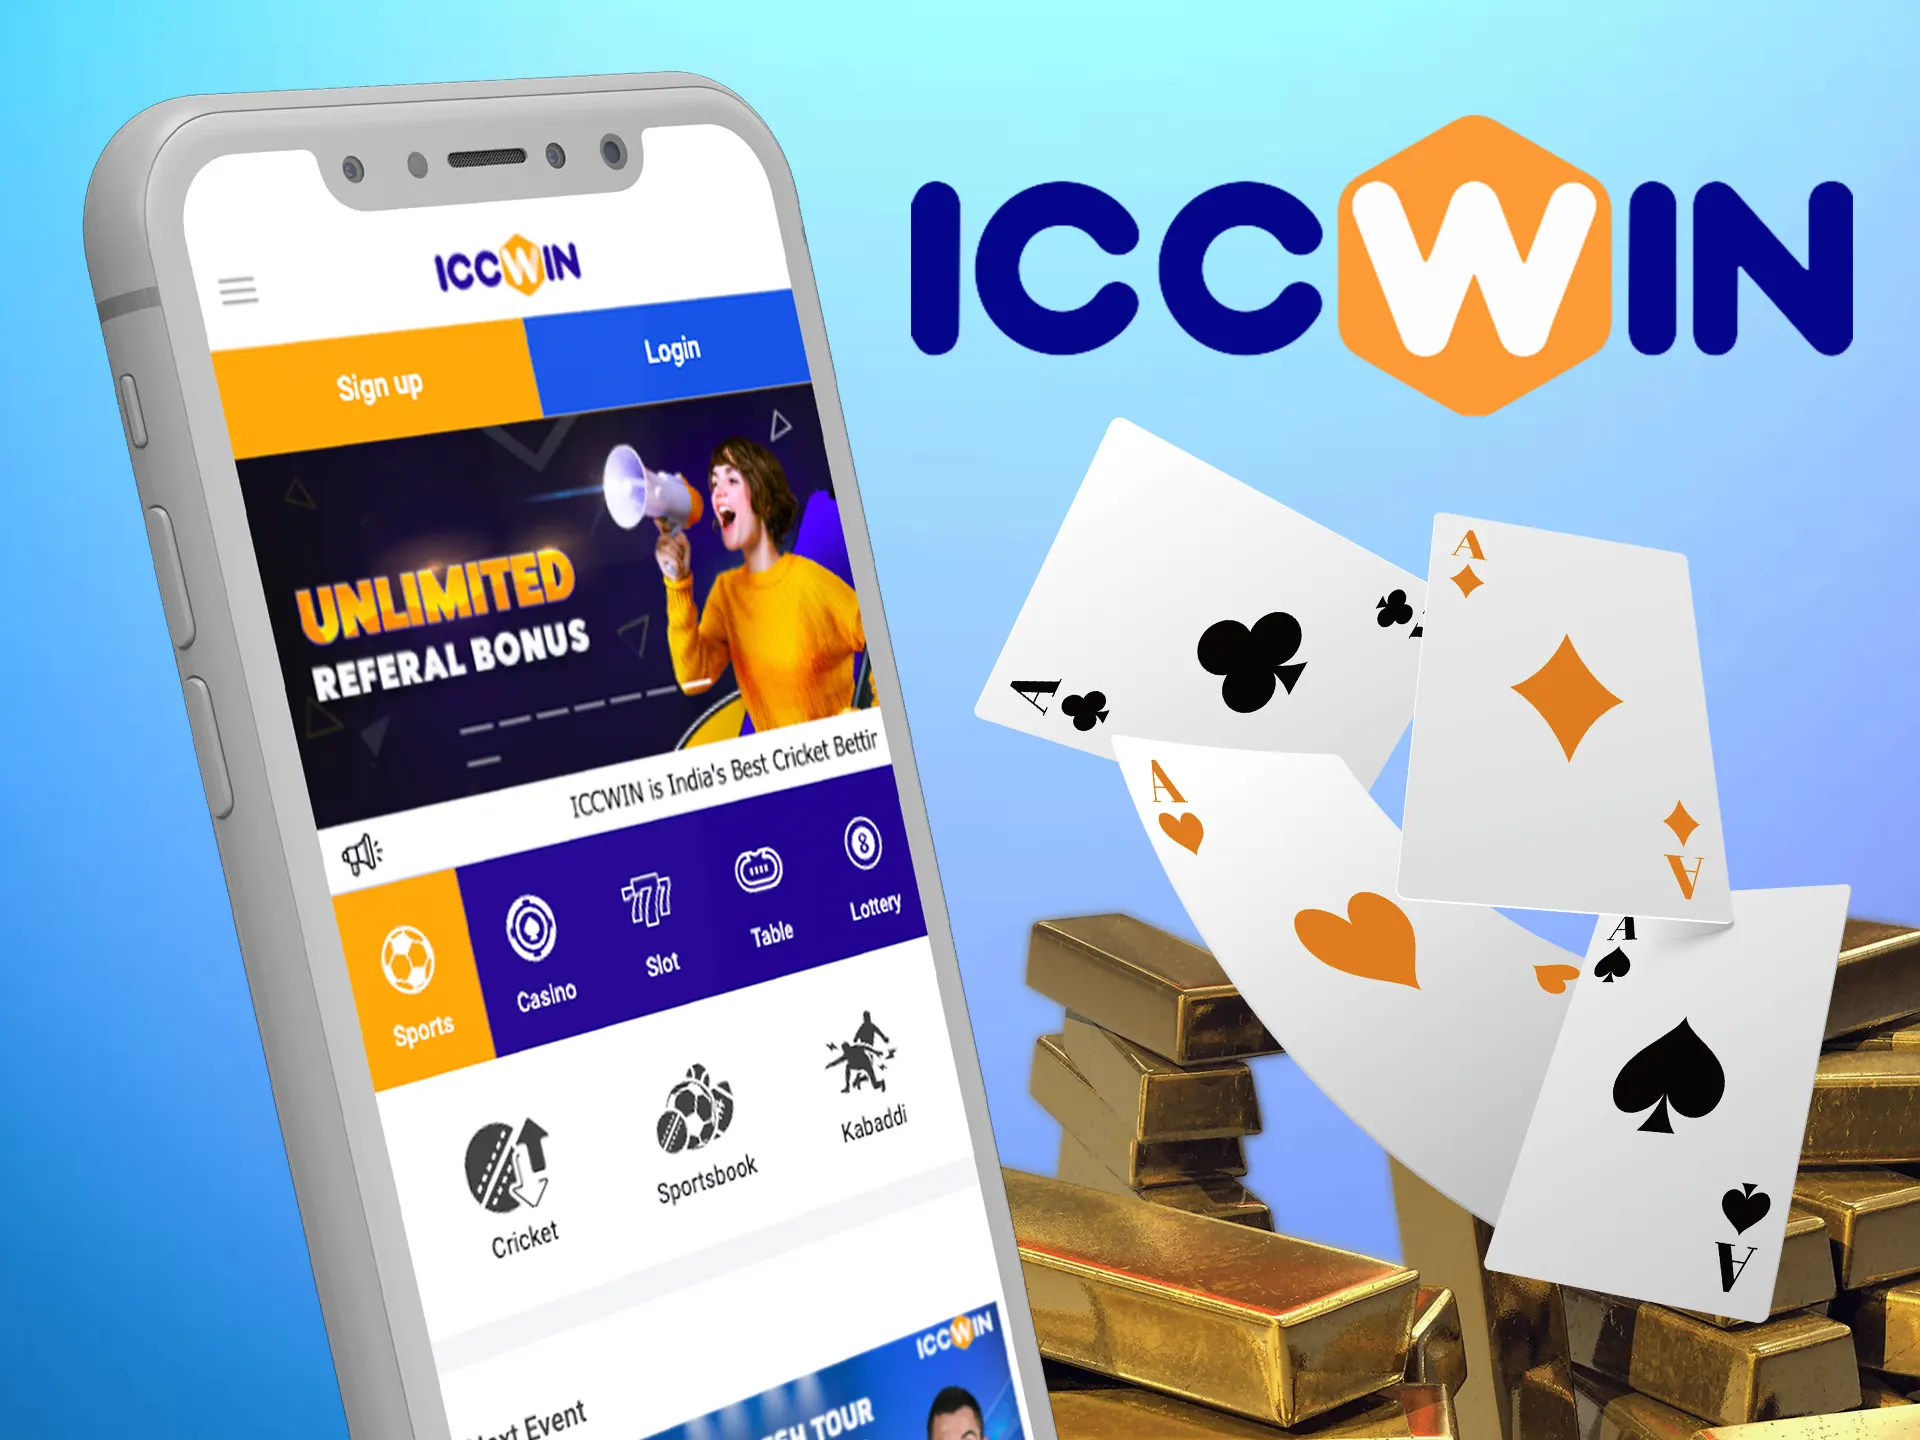 Try to play casino games in the ICCWIN app.